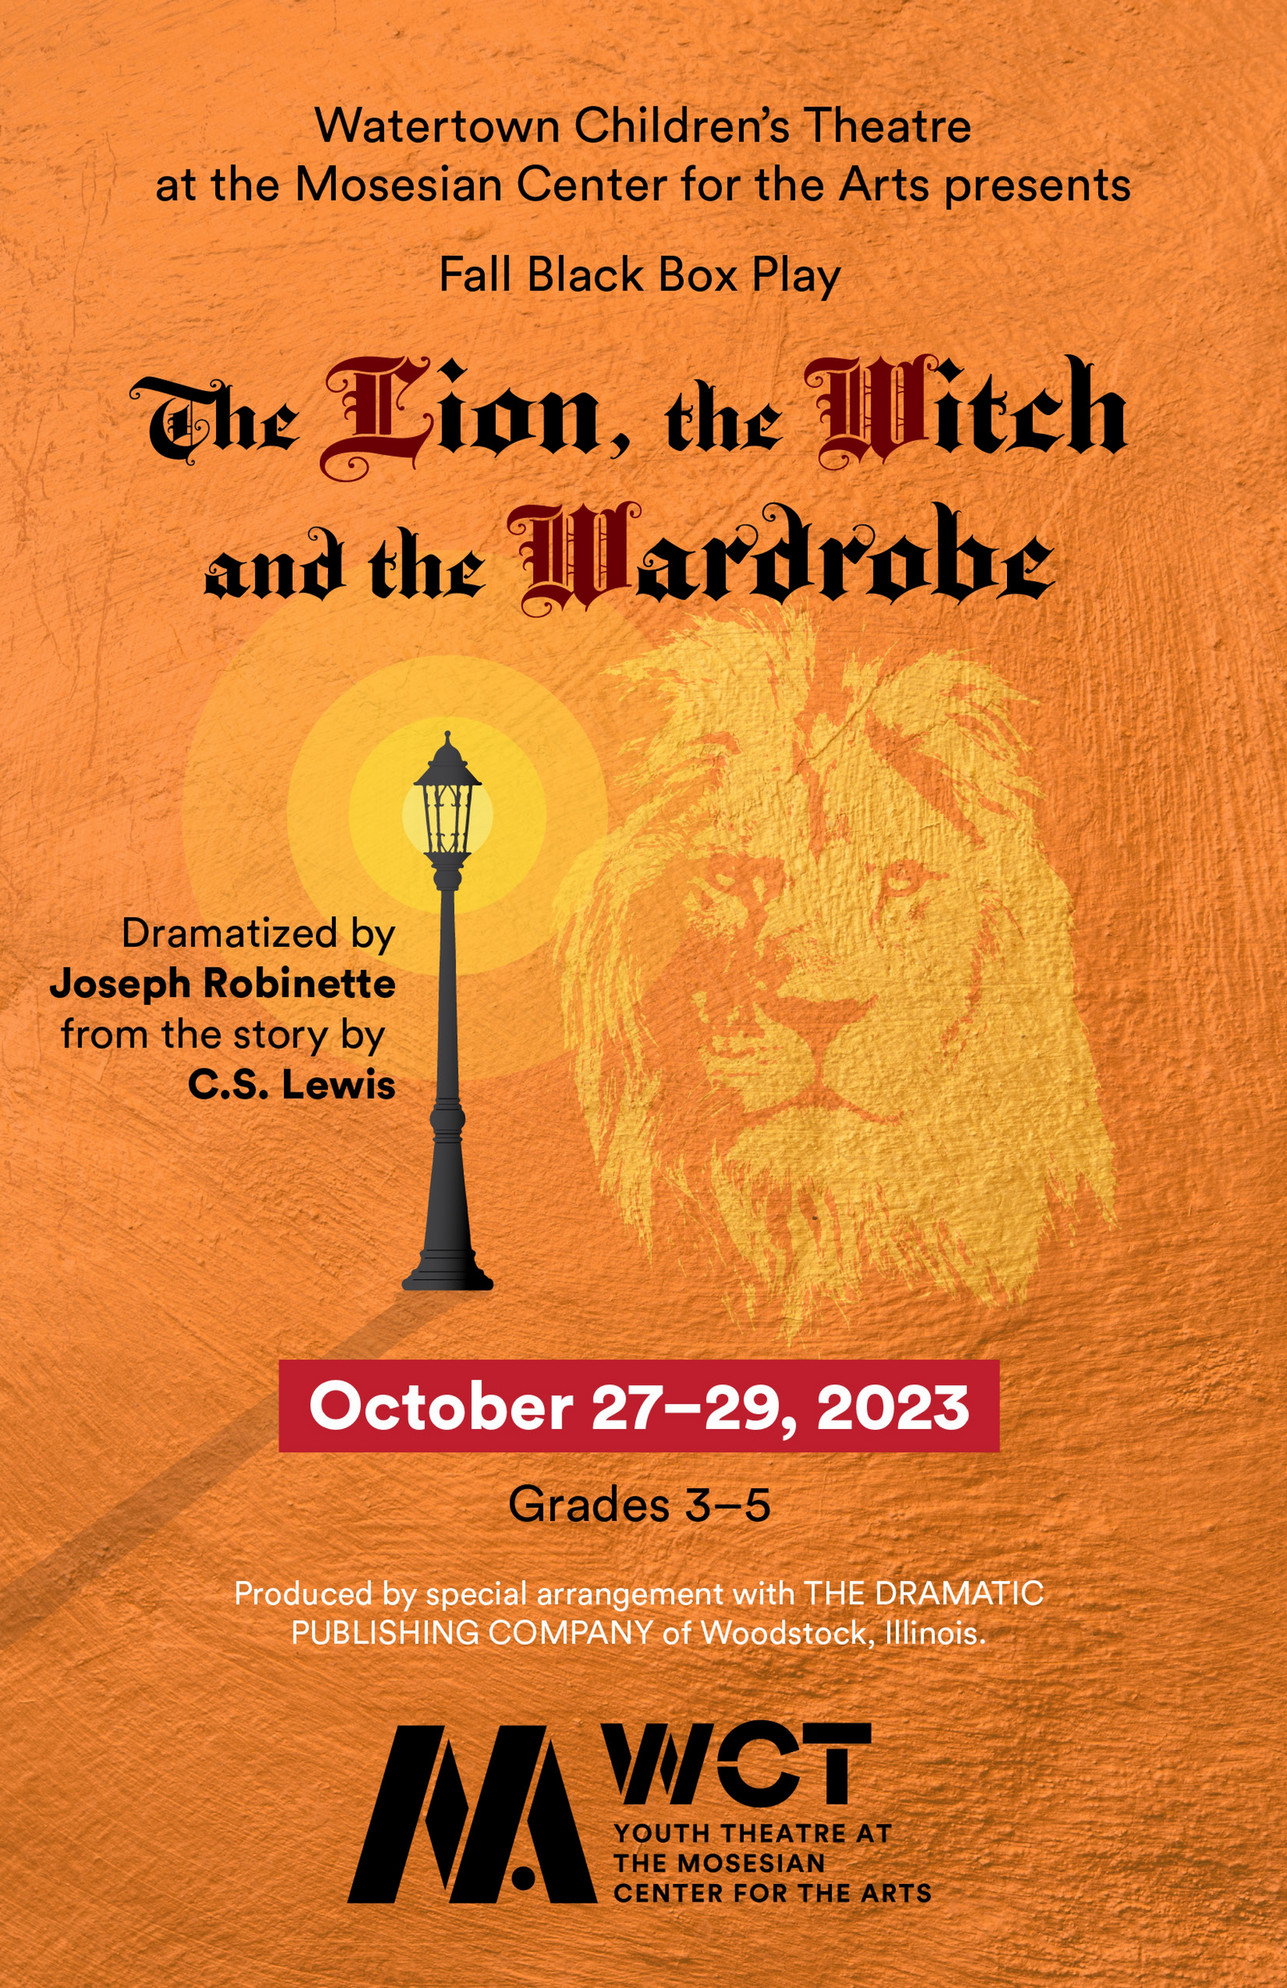 mosesian-center-for-the-arts-wct-the-lion-the-witch-and-the-wardrobe